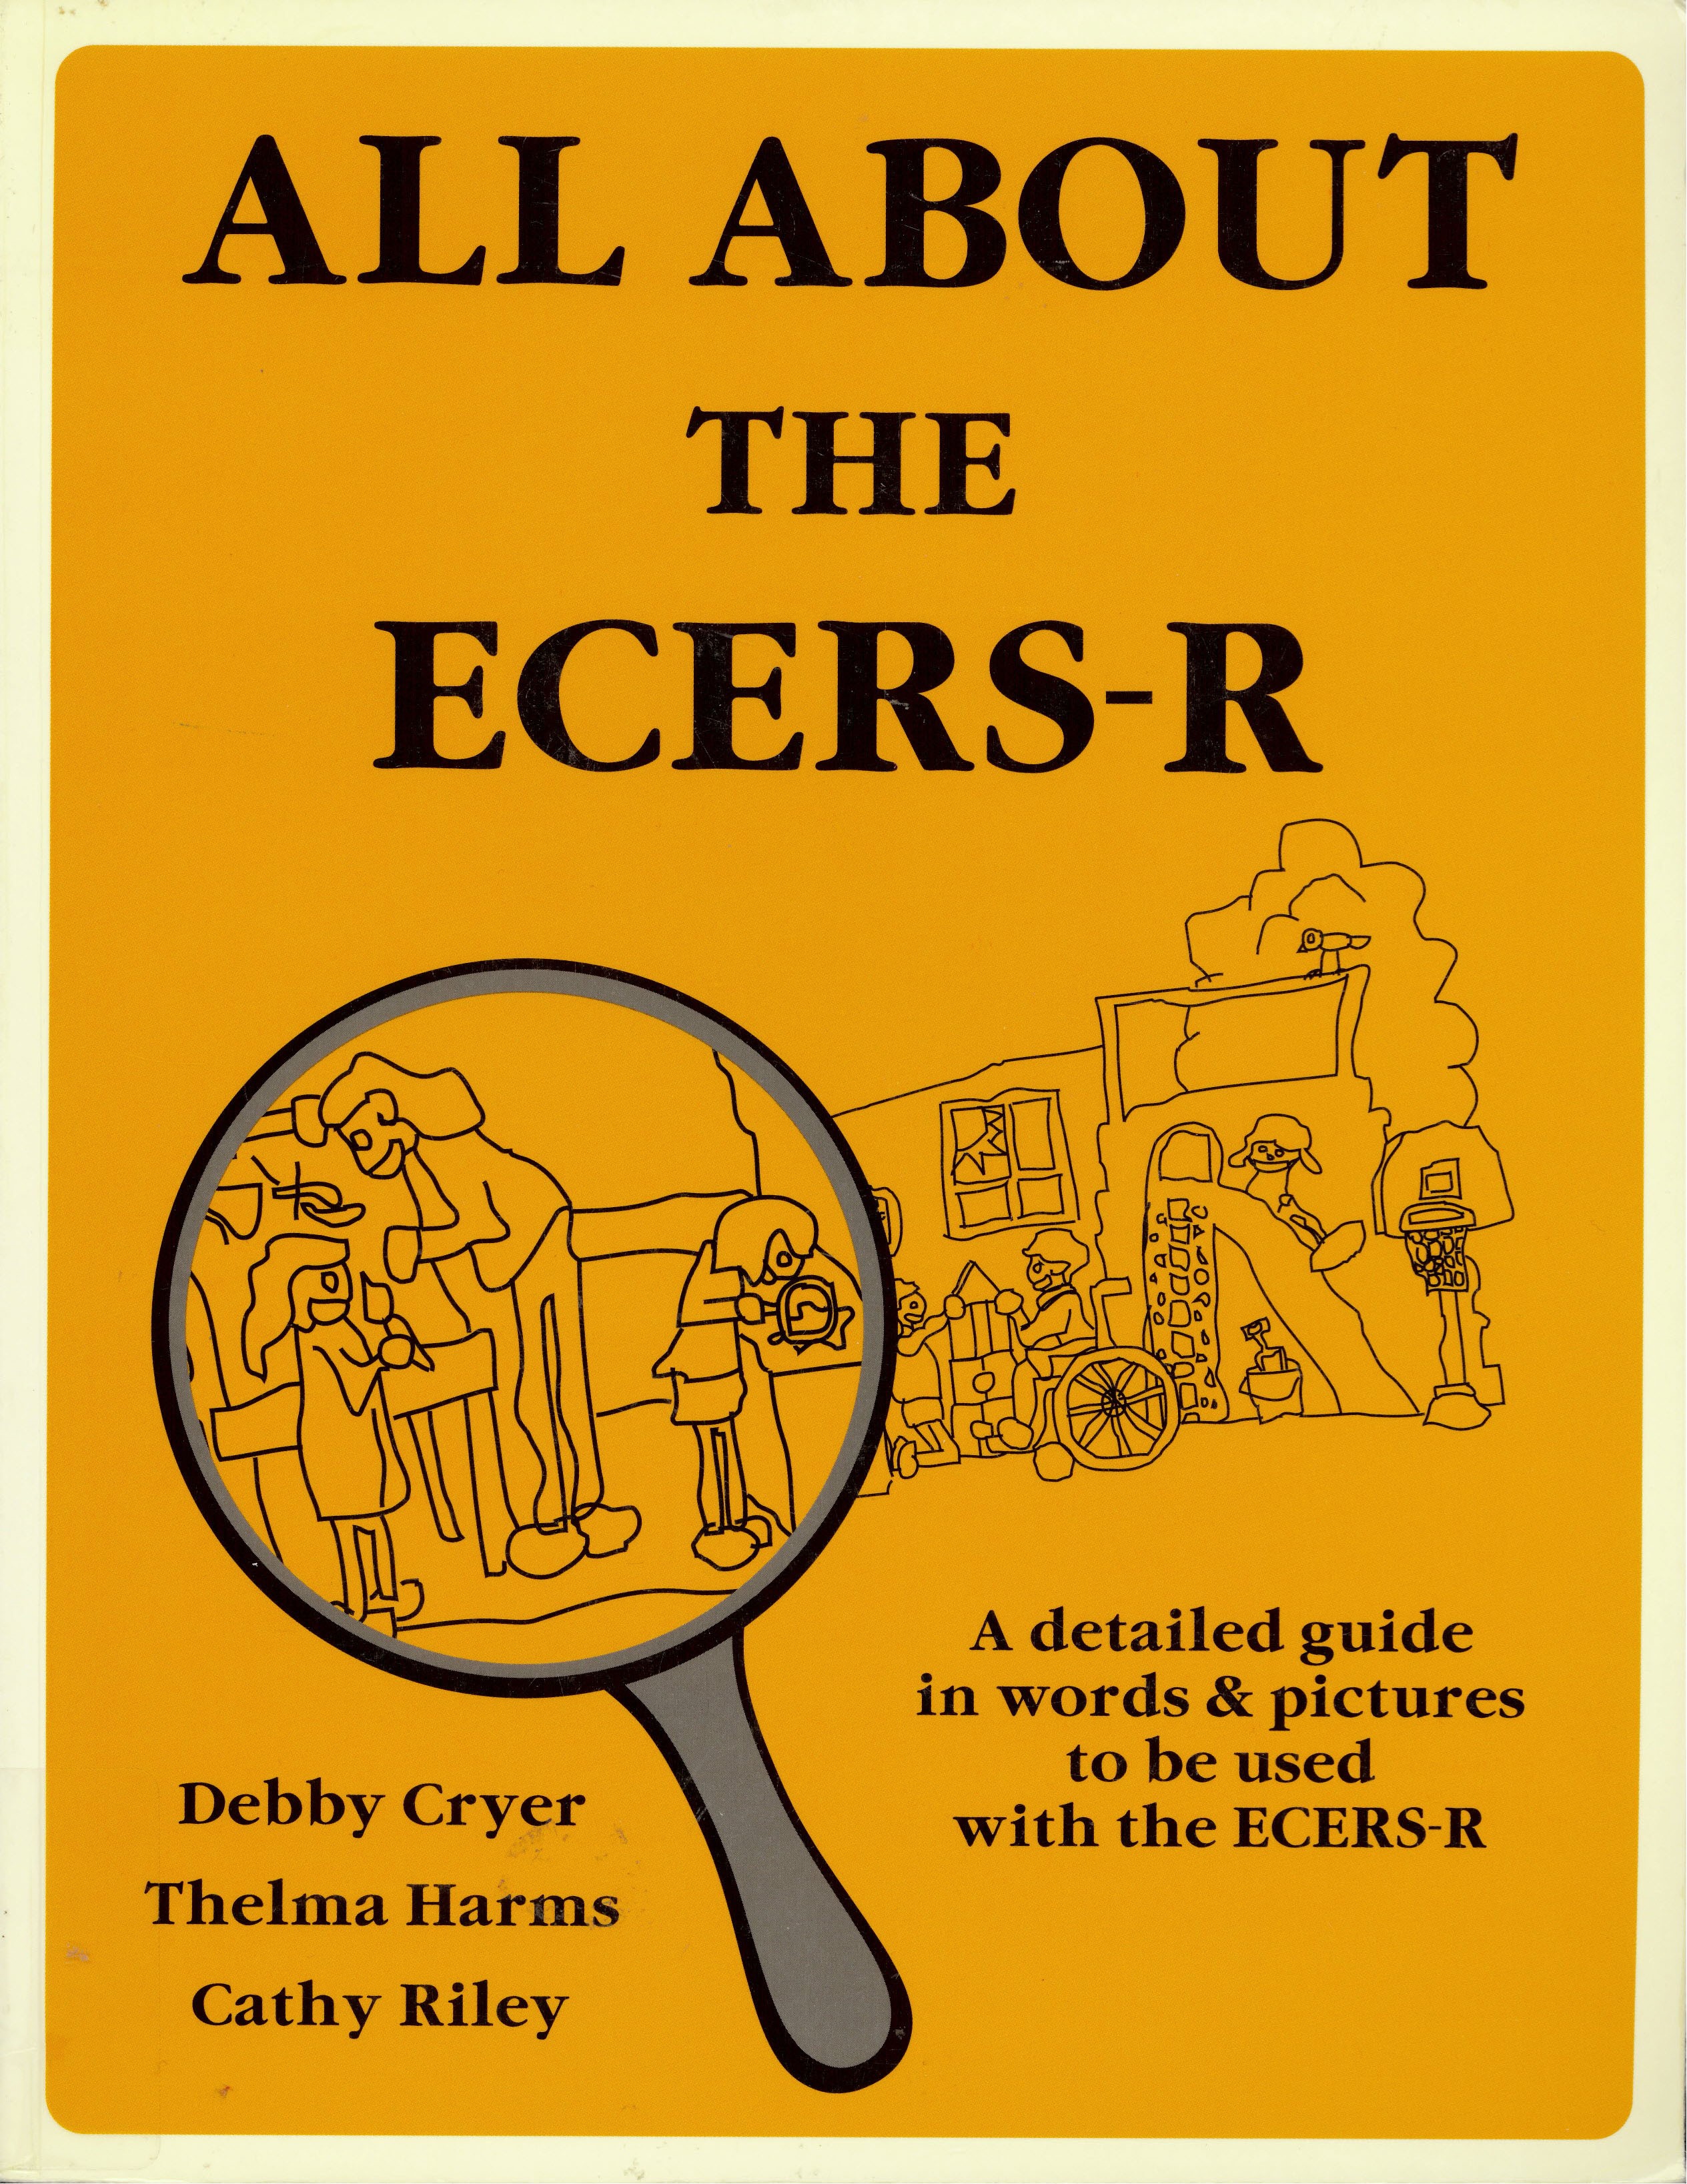 All about the ECERS-R : a detailed guide in words and pictures to be used with the ECERS-R